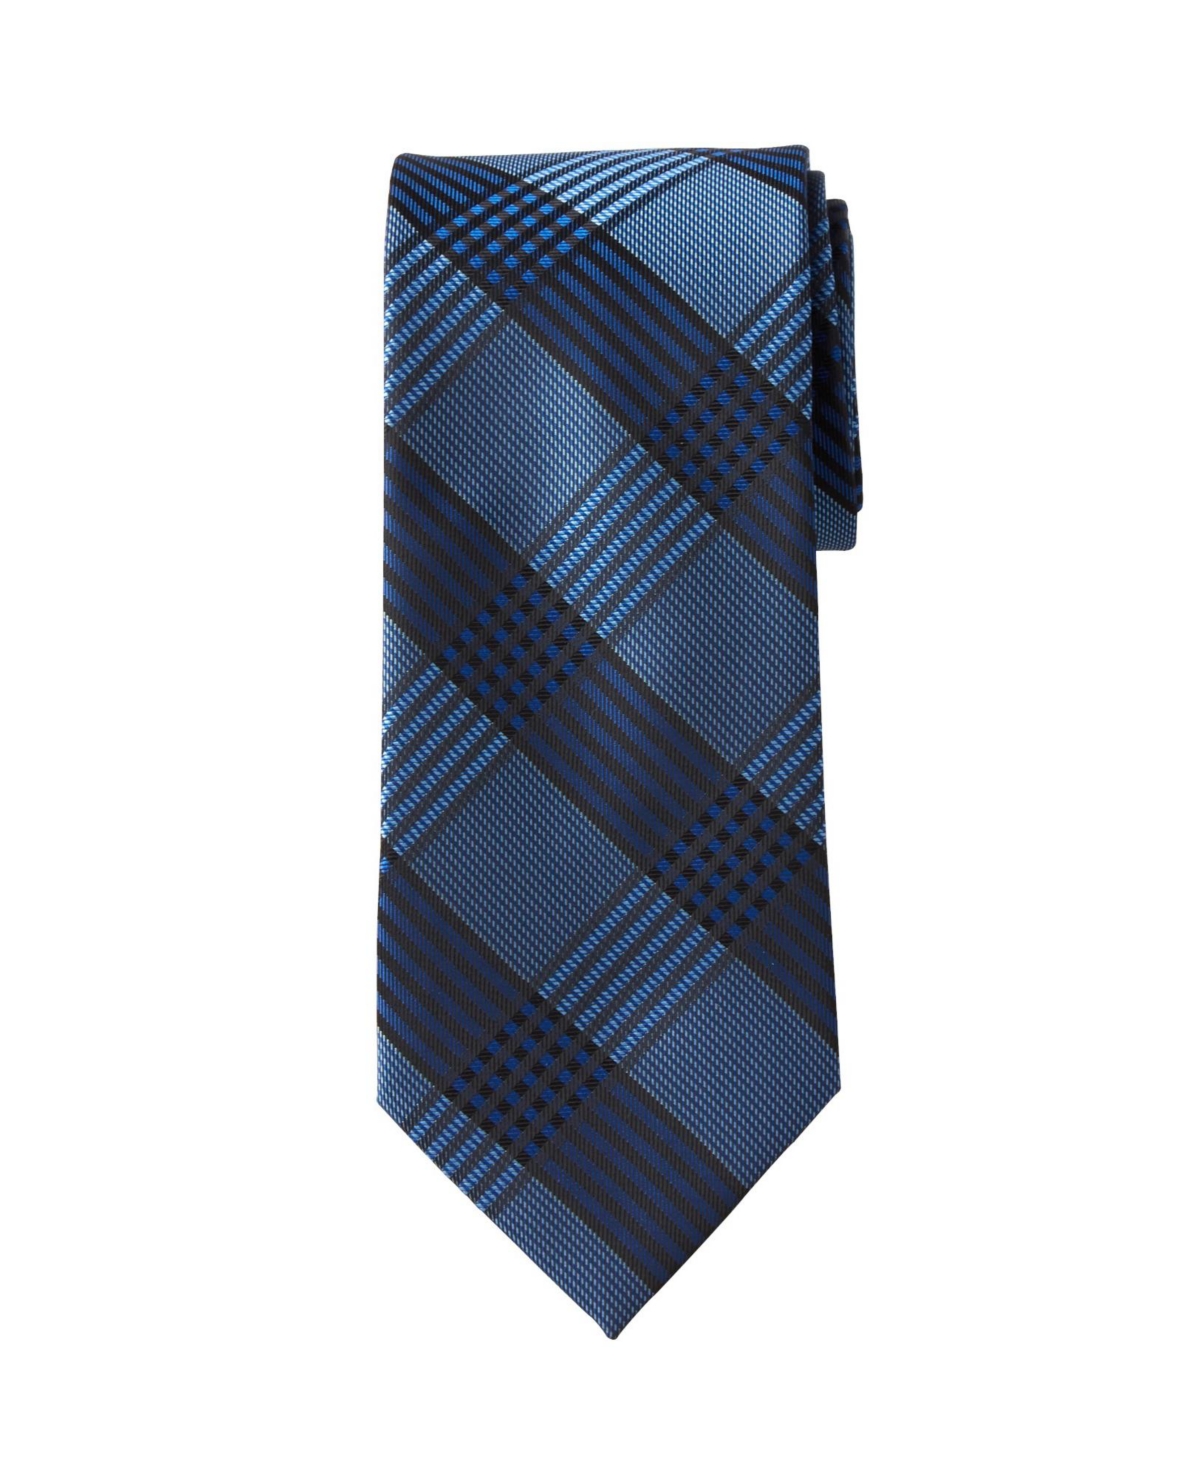 Big & Tall Ks Signature Collection Extra Long Check Tie - White check